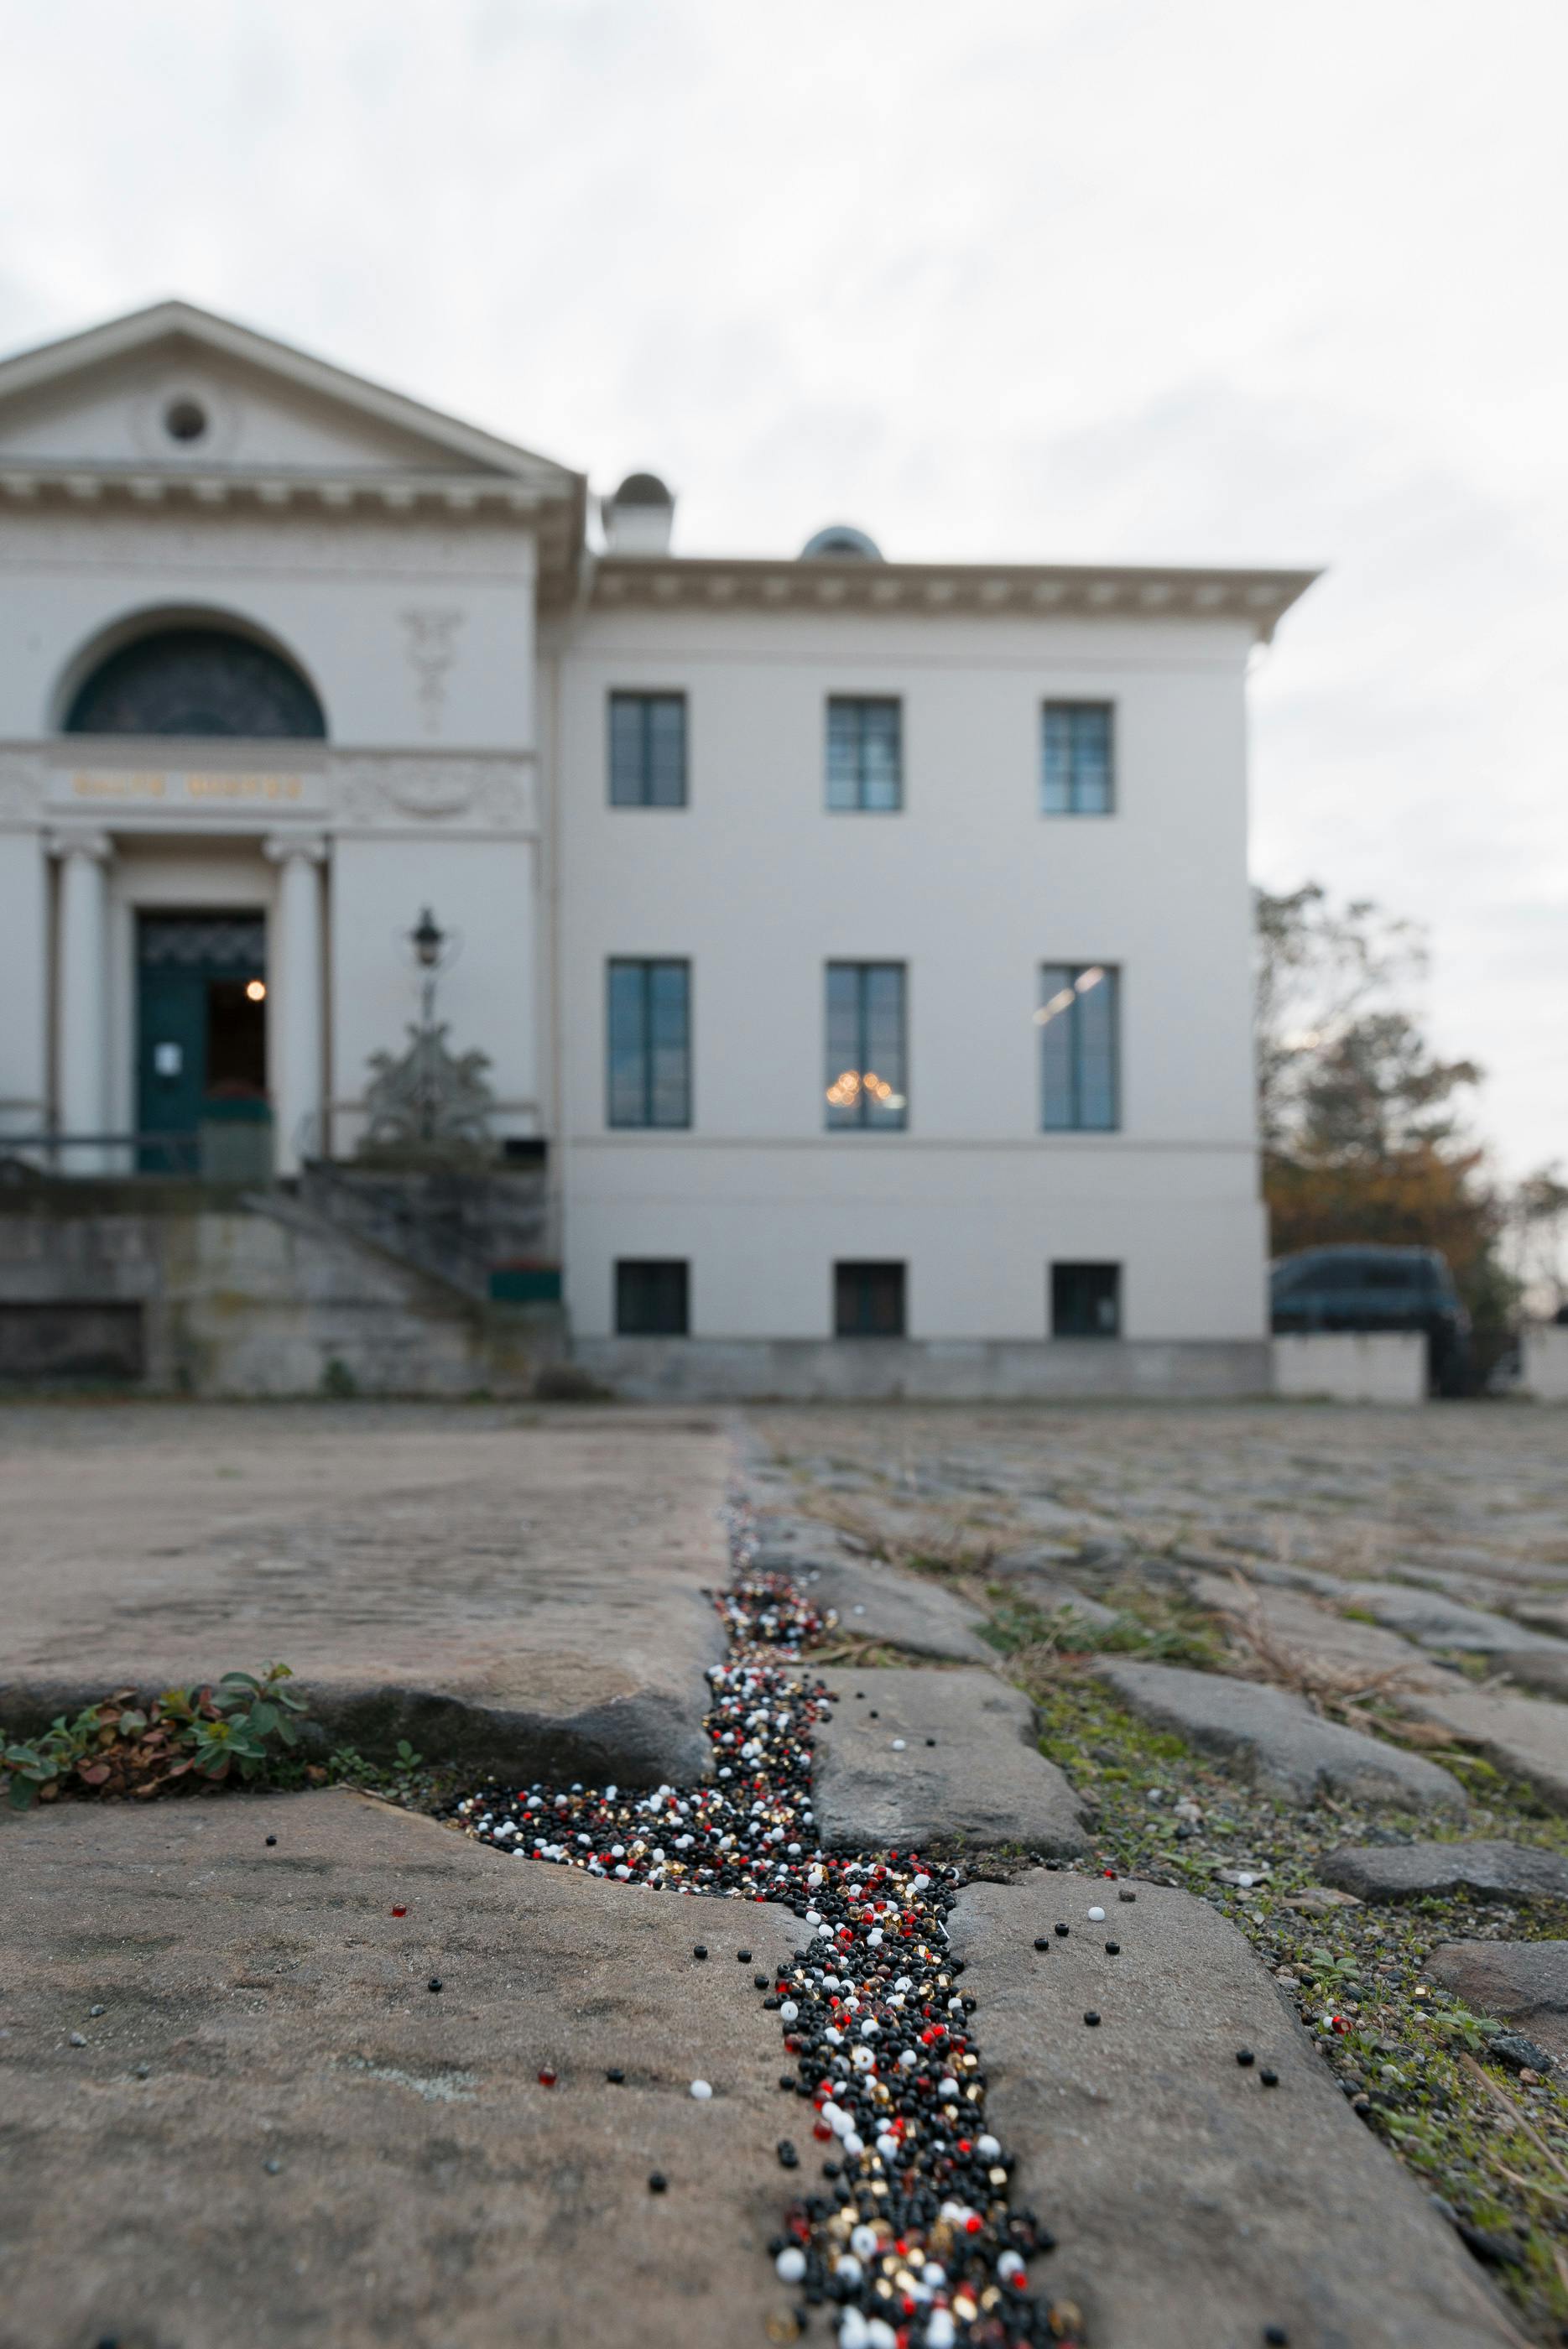 A close view of beads black, red, white, and gold beads filling the cracks of cobblestone pavement. Part of a white building is blurred in the background.